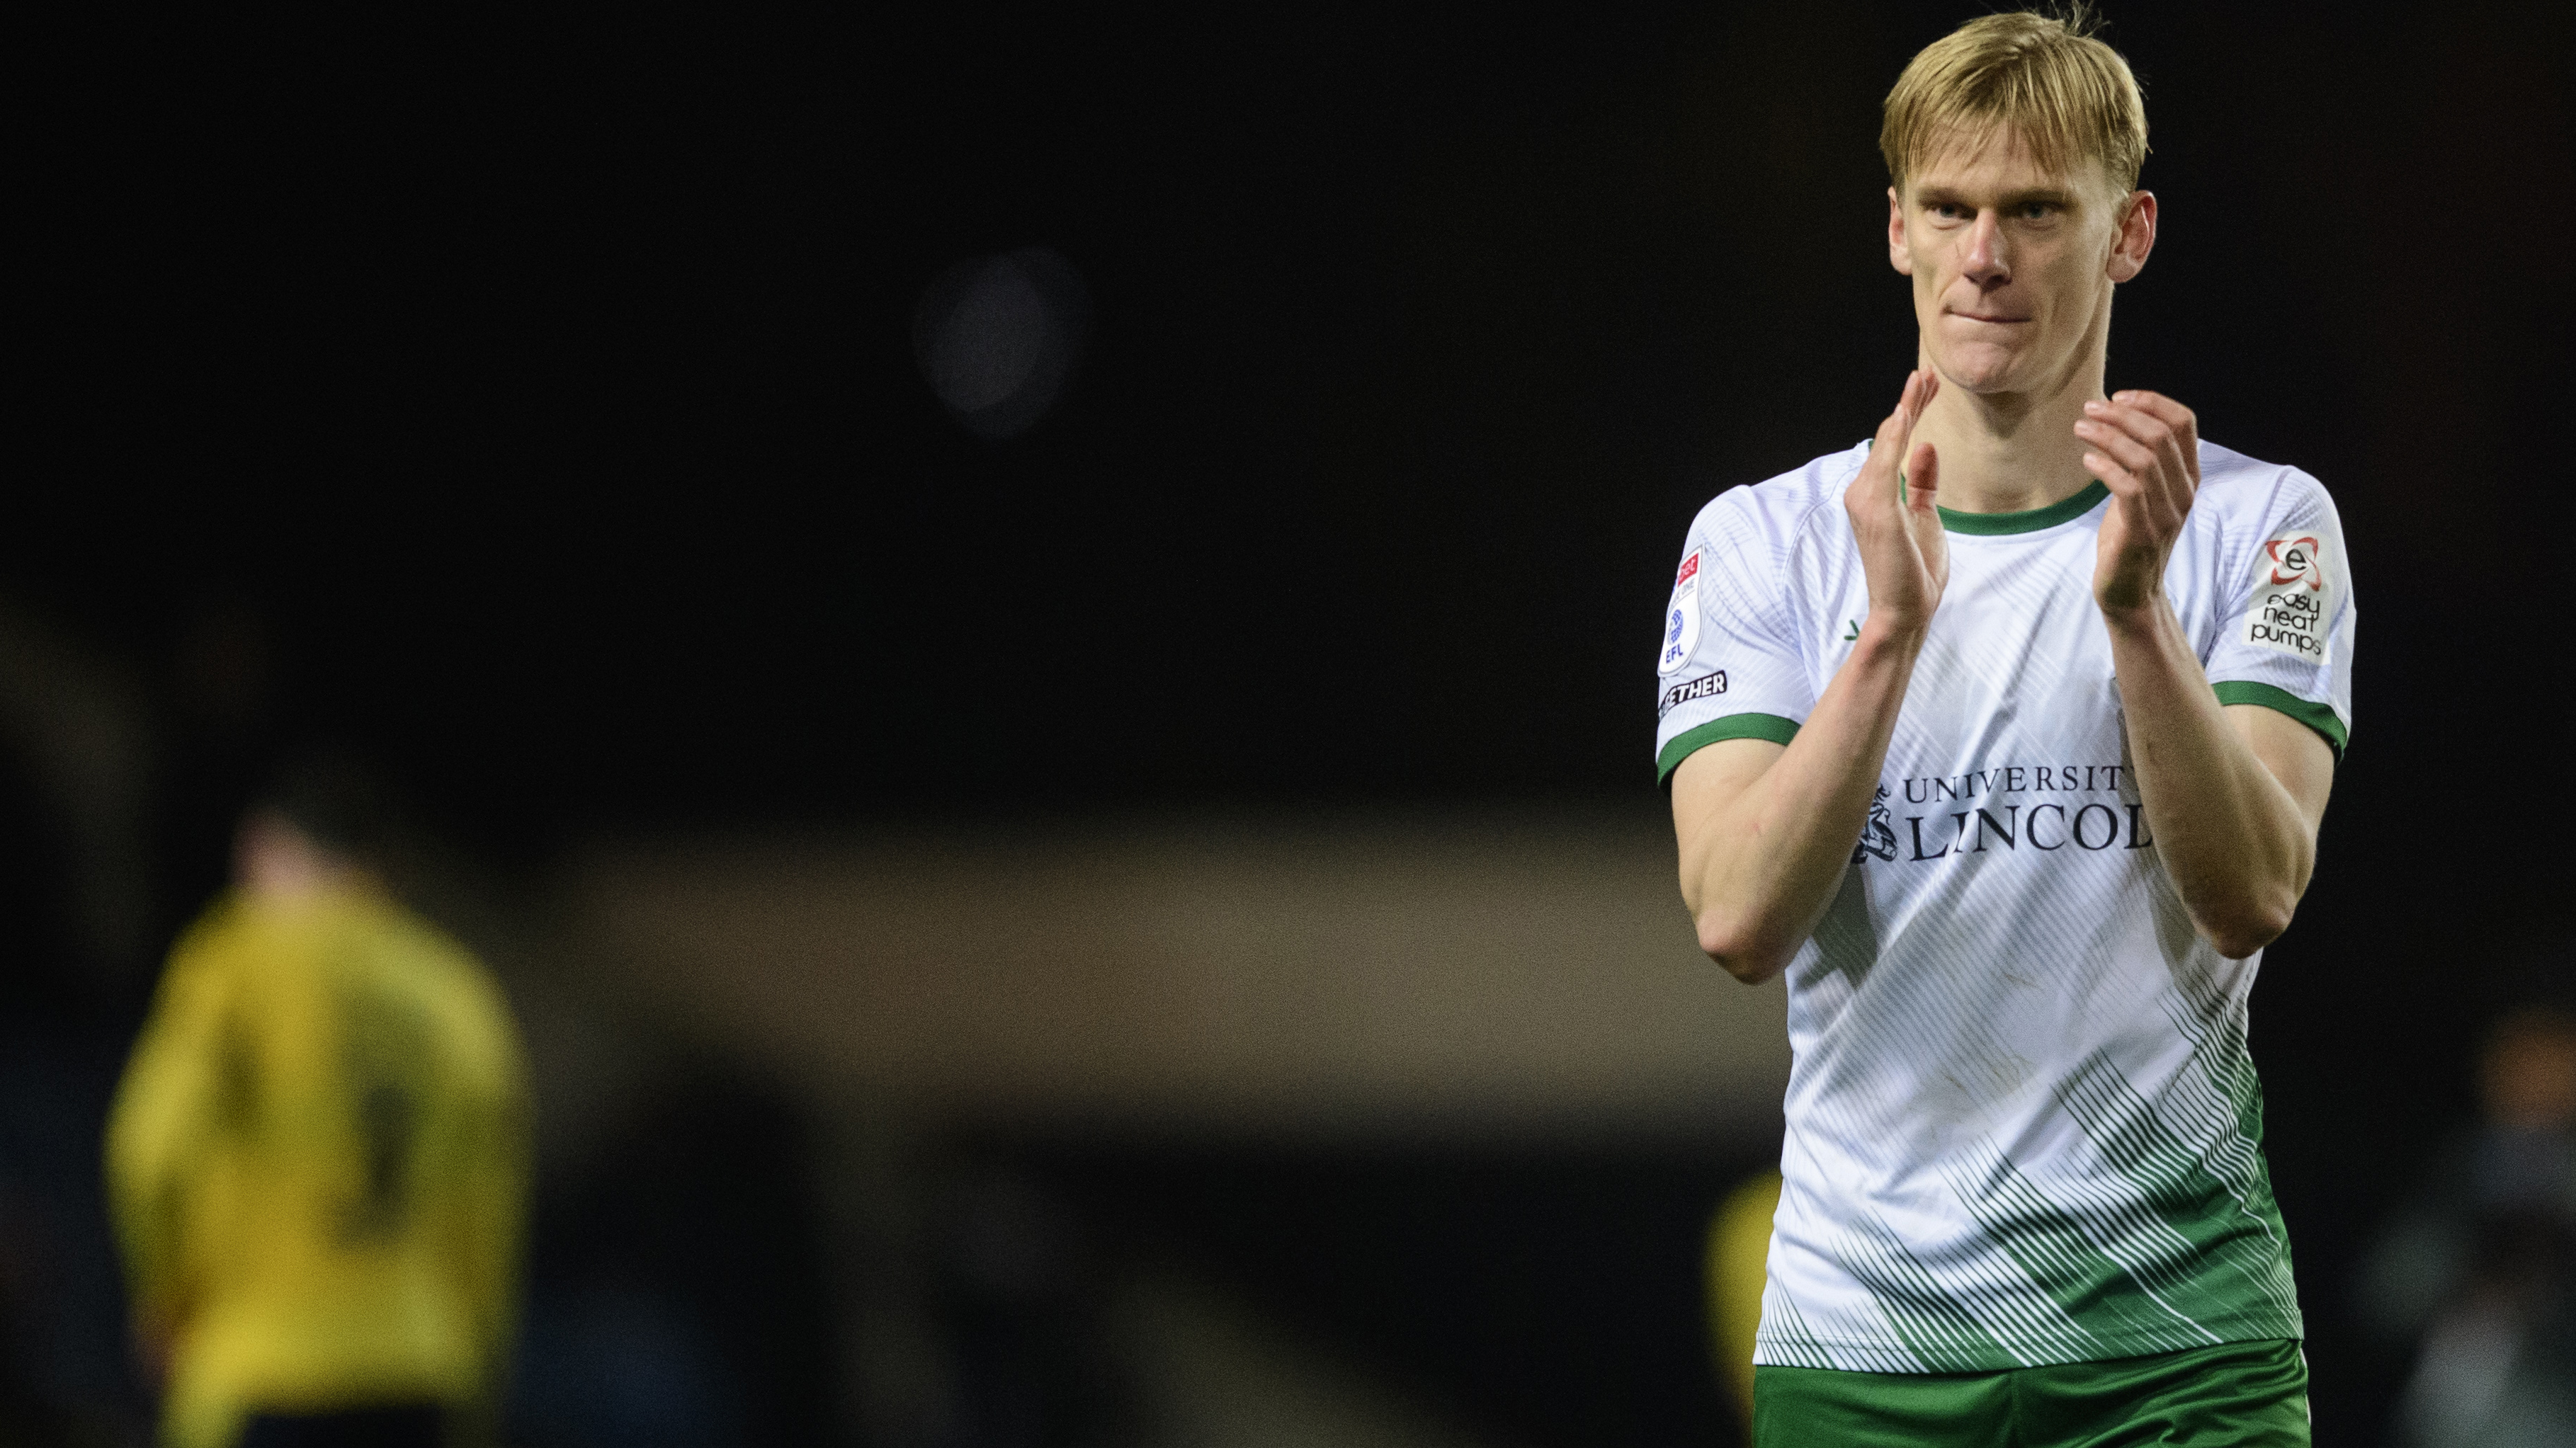 Lincoln City's Lasse Sorensen applauds after a match. He is wearing a white shirt and green shorts.